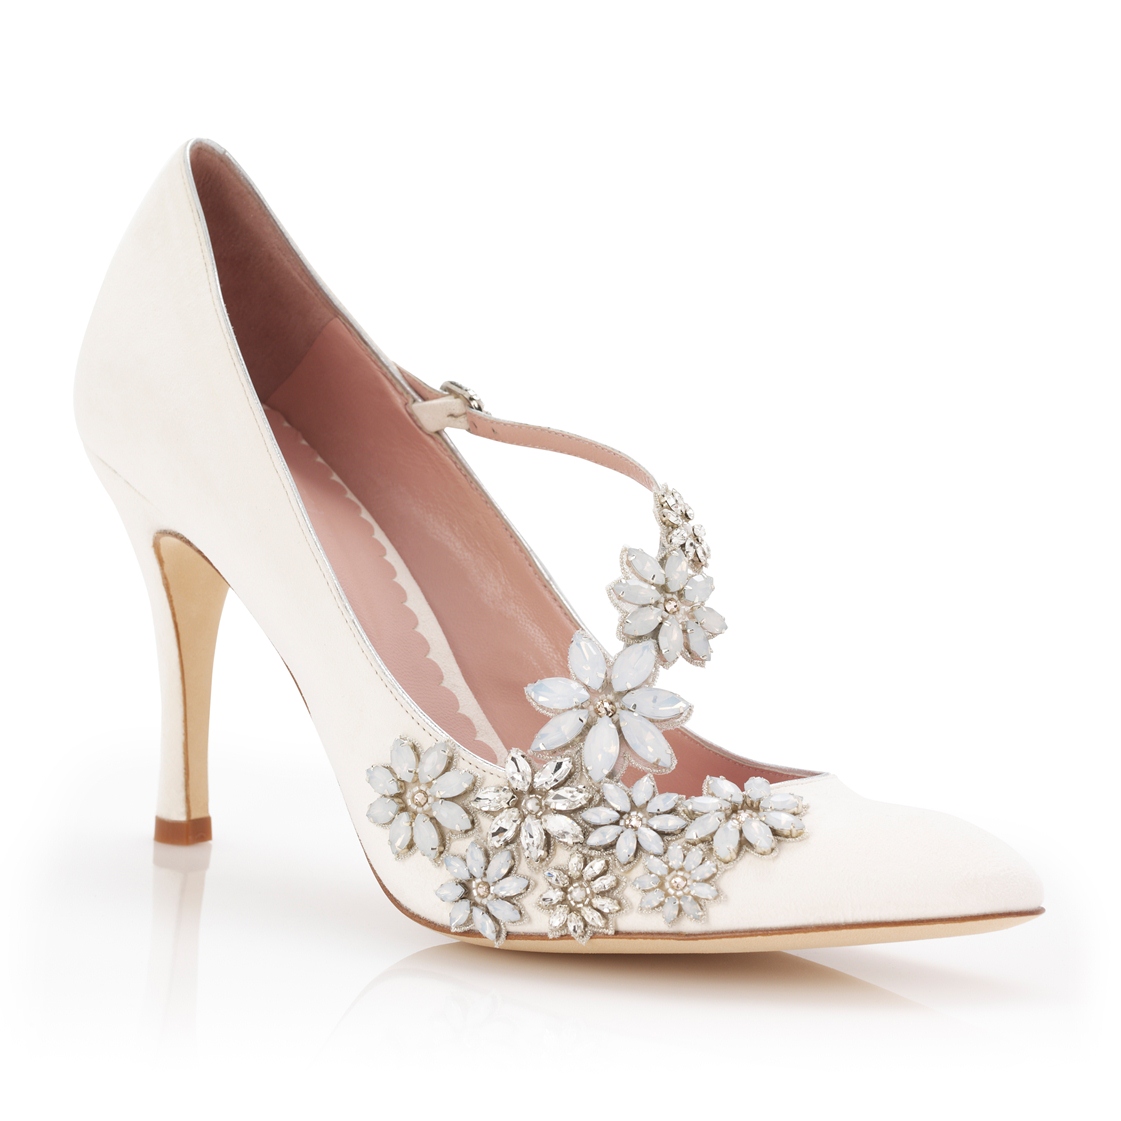 Daisy Ivory from the Celeste Collection by Emmy Shoes